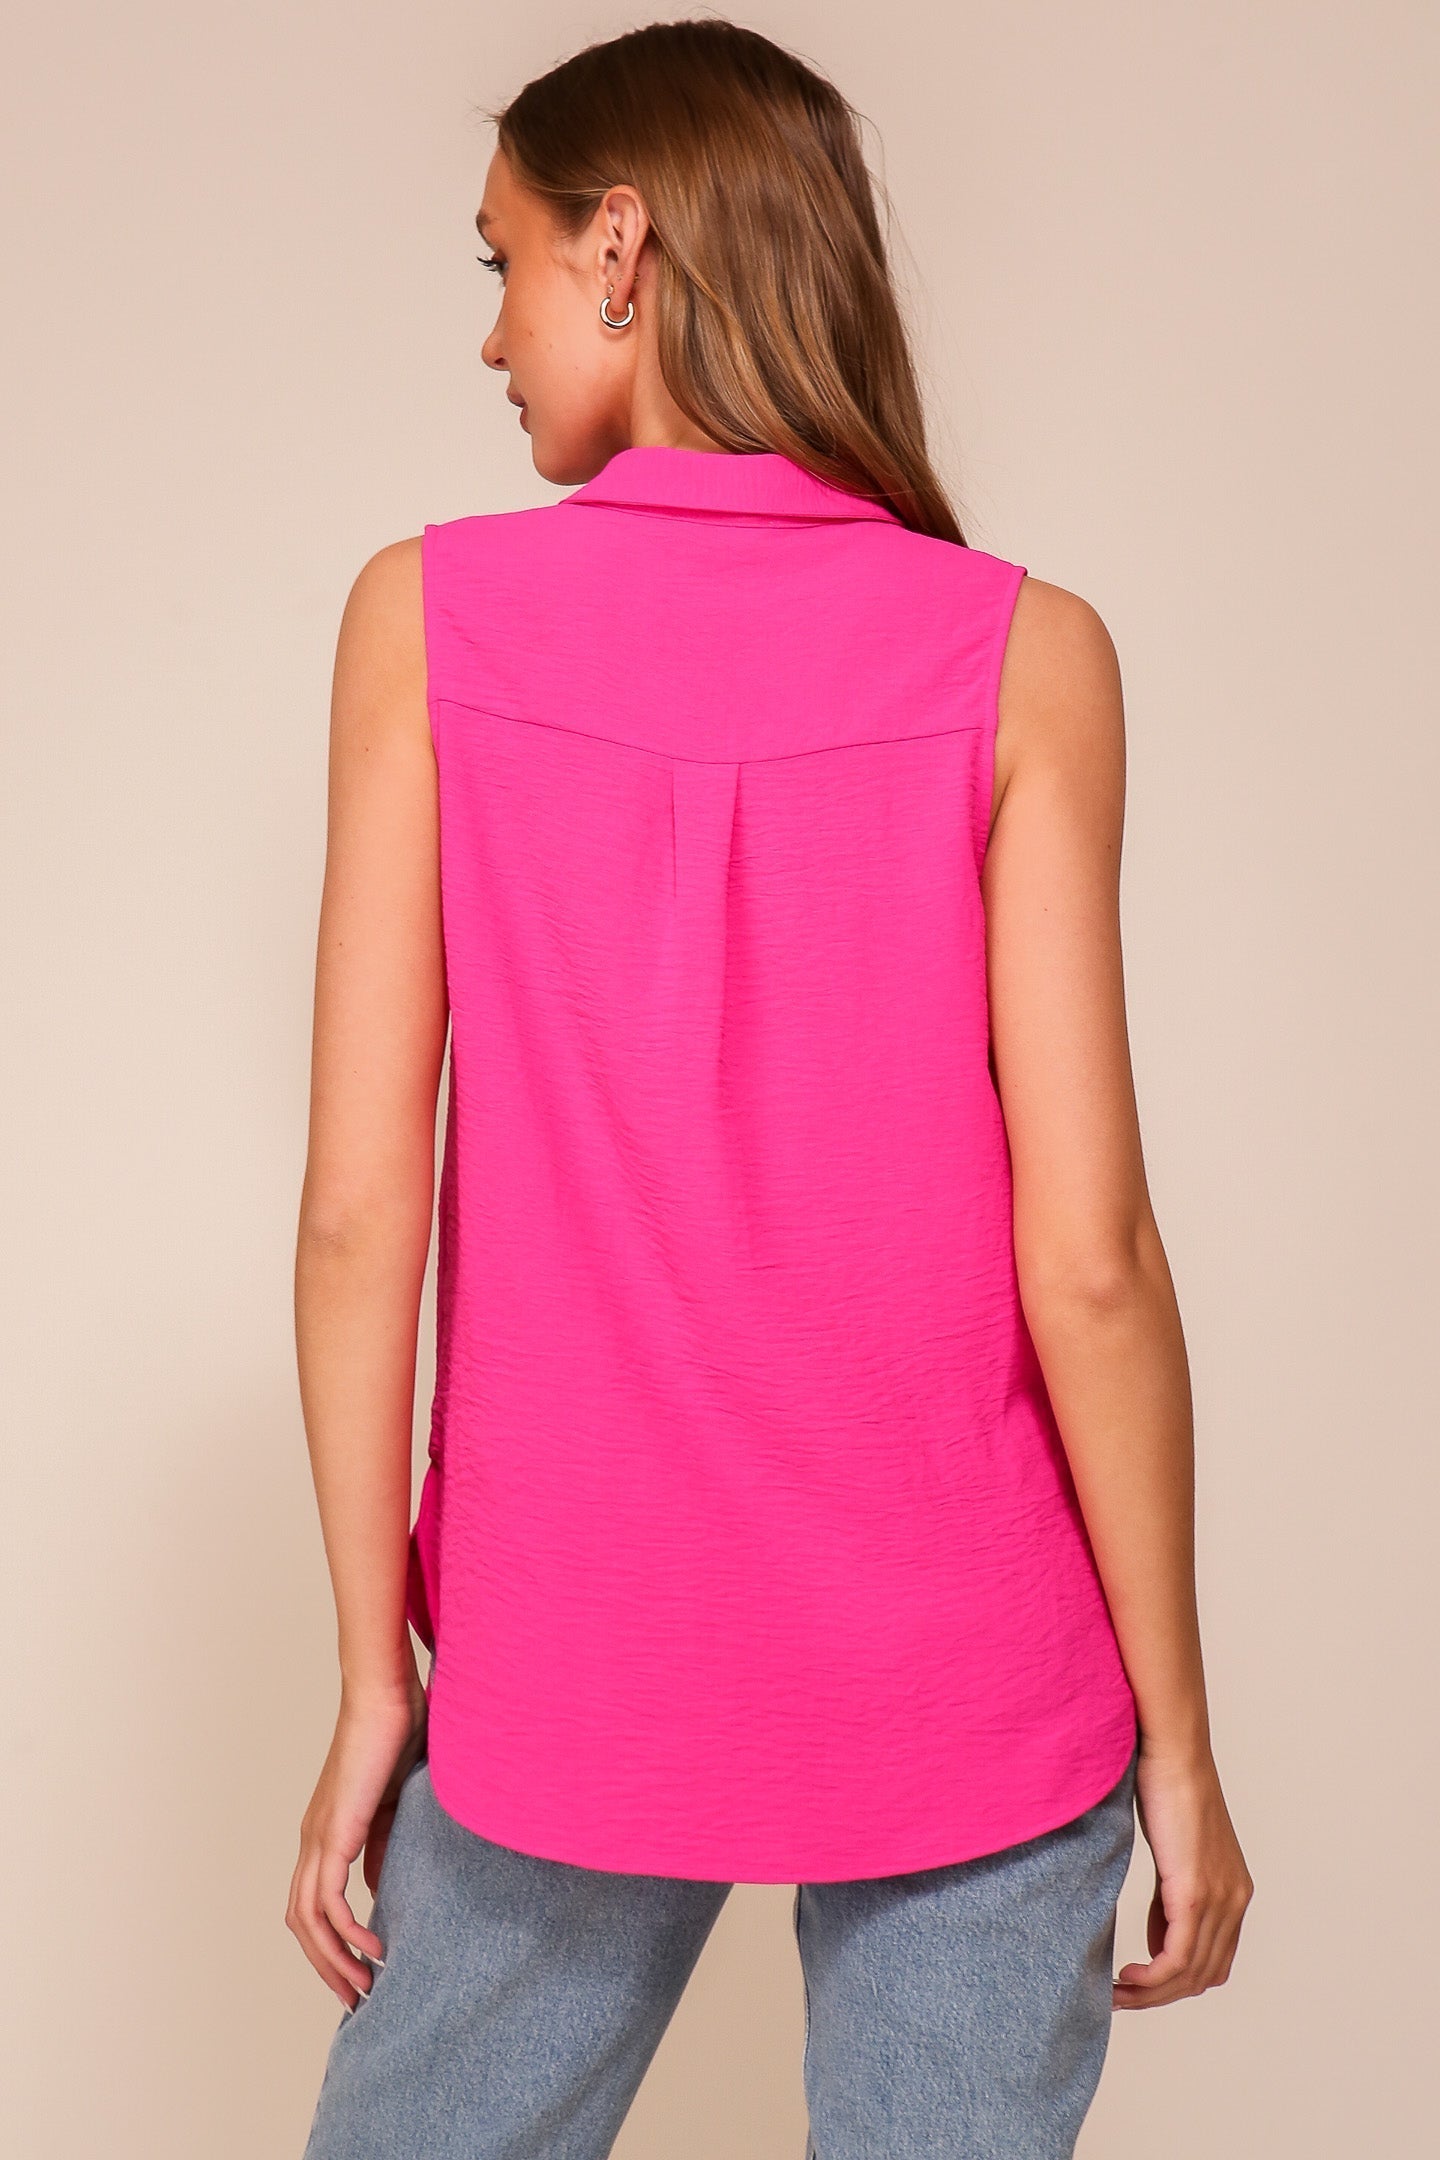 Back view of Timing (WN9713) women's Sleeveless Collared V-Neck Top with Chest Pocket and Flared Silhouette in PInk